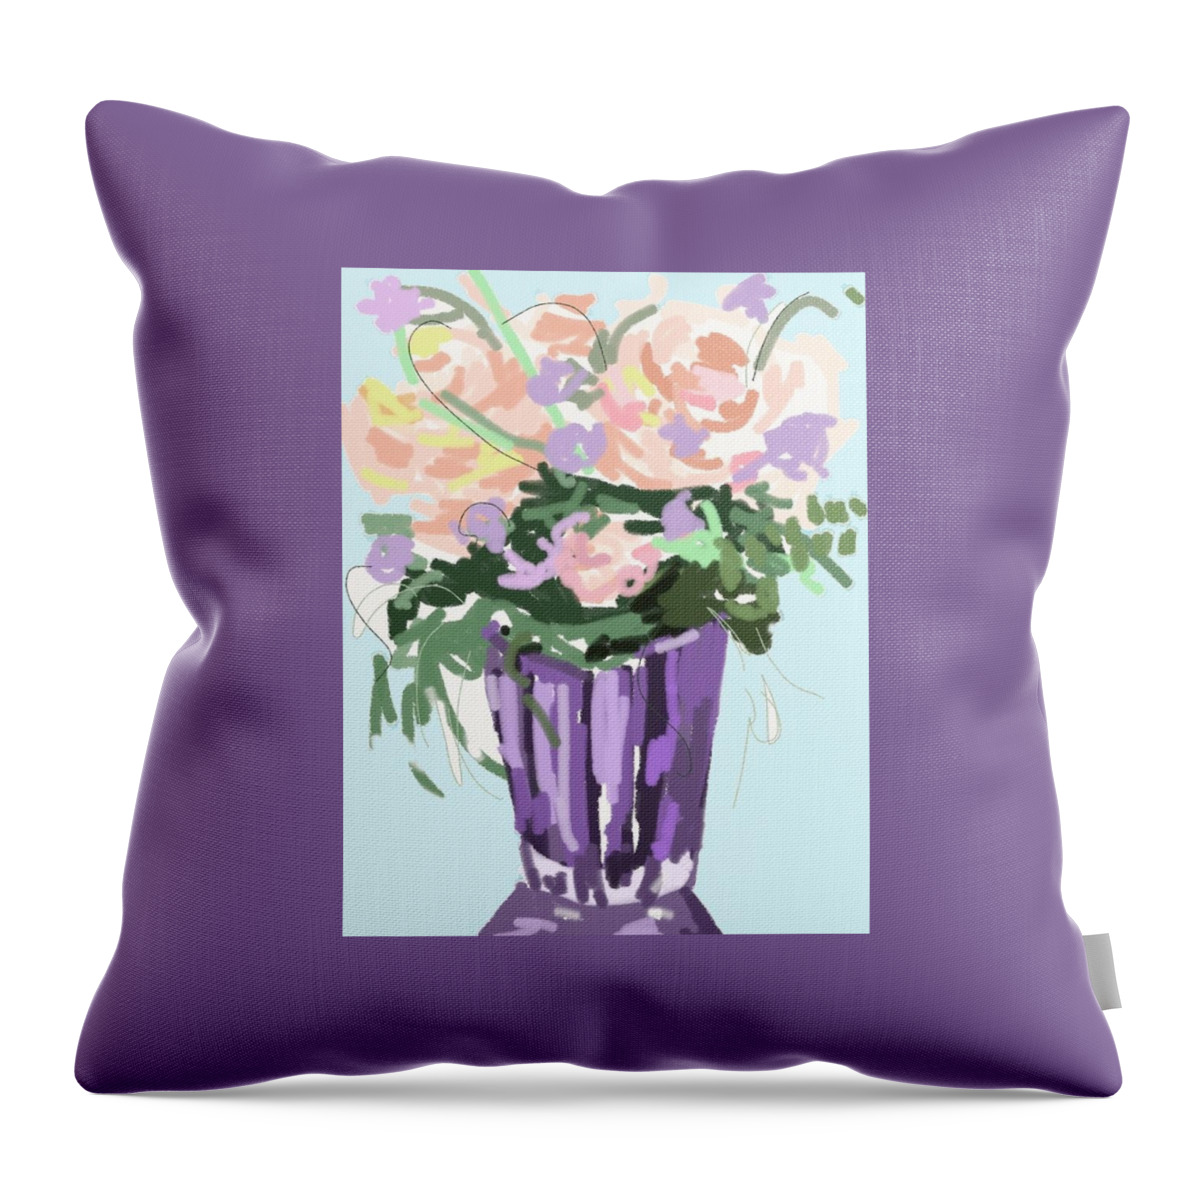  Throw Pillow featuring the painting Barbara's Flowers II by Carol Berning